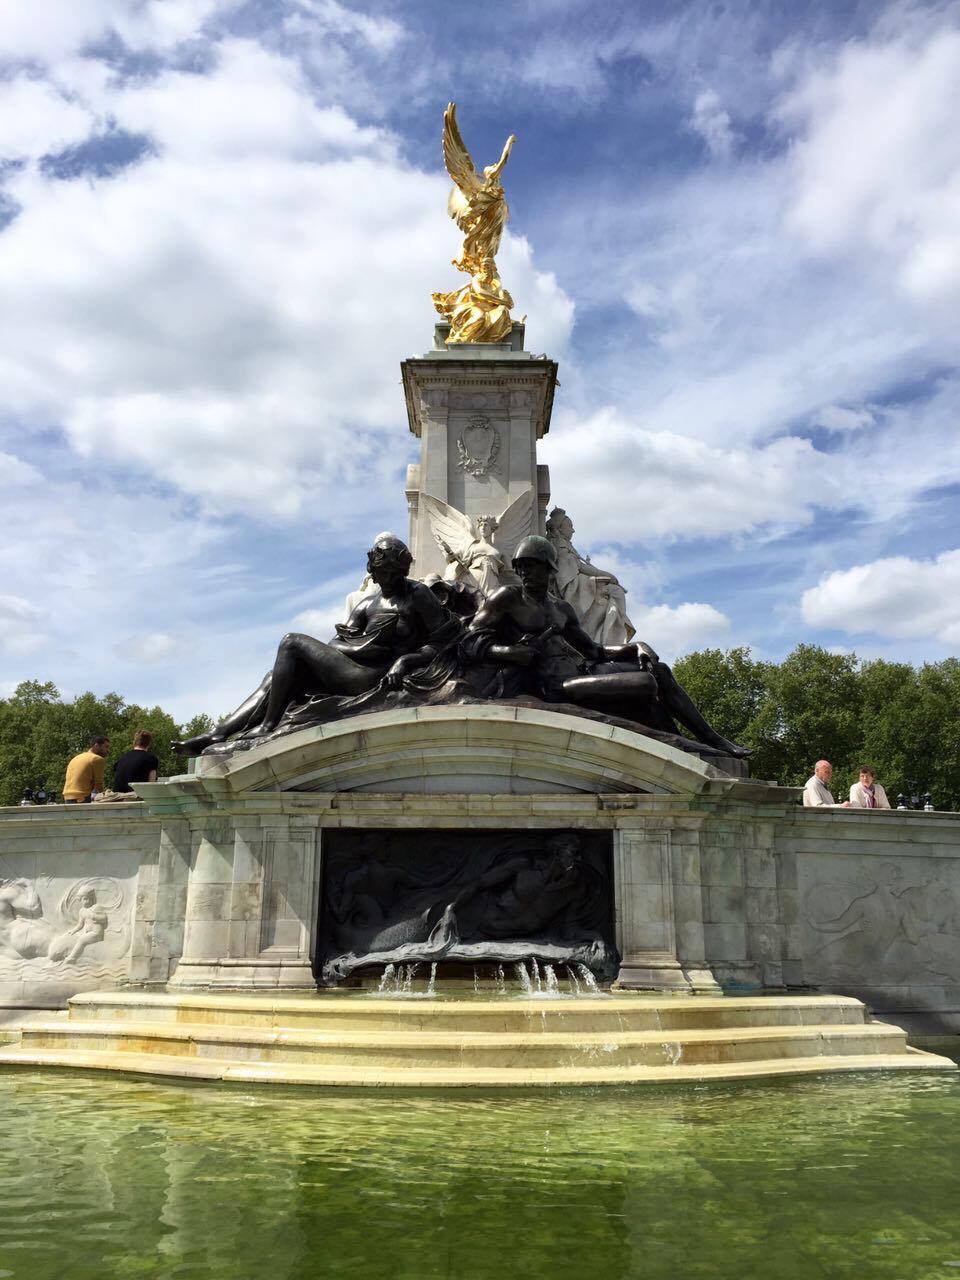 A monument to Queen Victoria